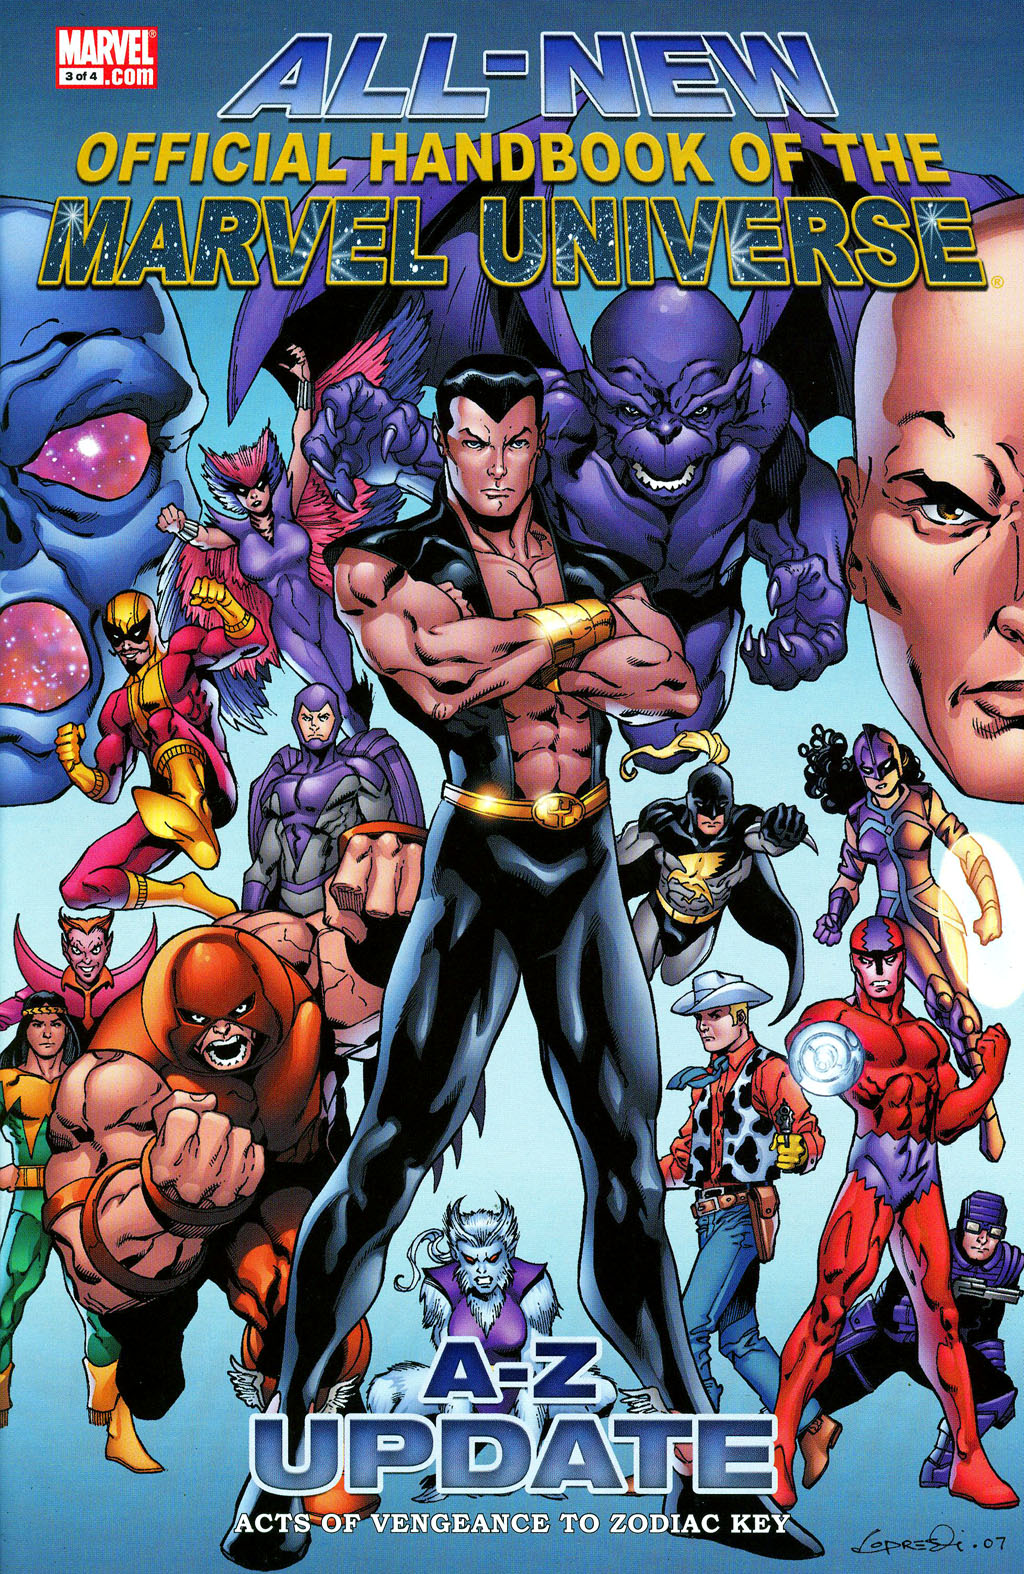 Read online All-New Official Handbook of the Marvel Universe A to Z: Update comic -  Issue #3 - 1